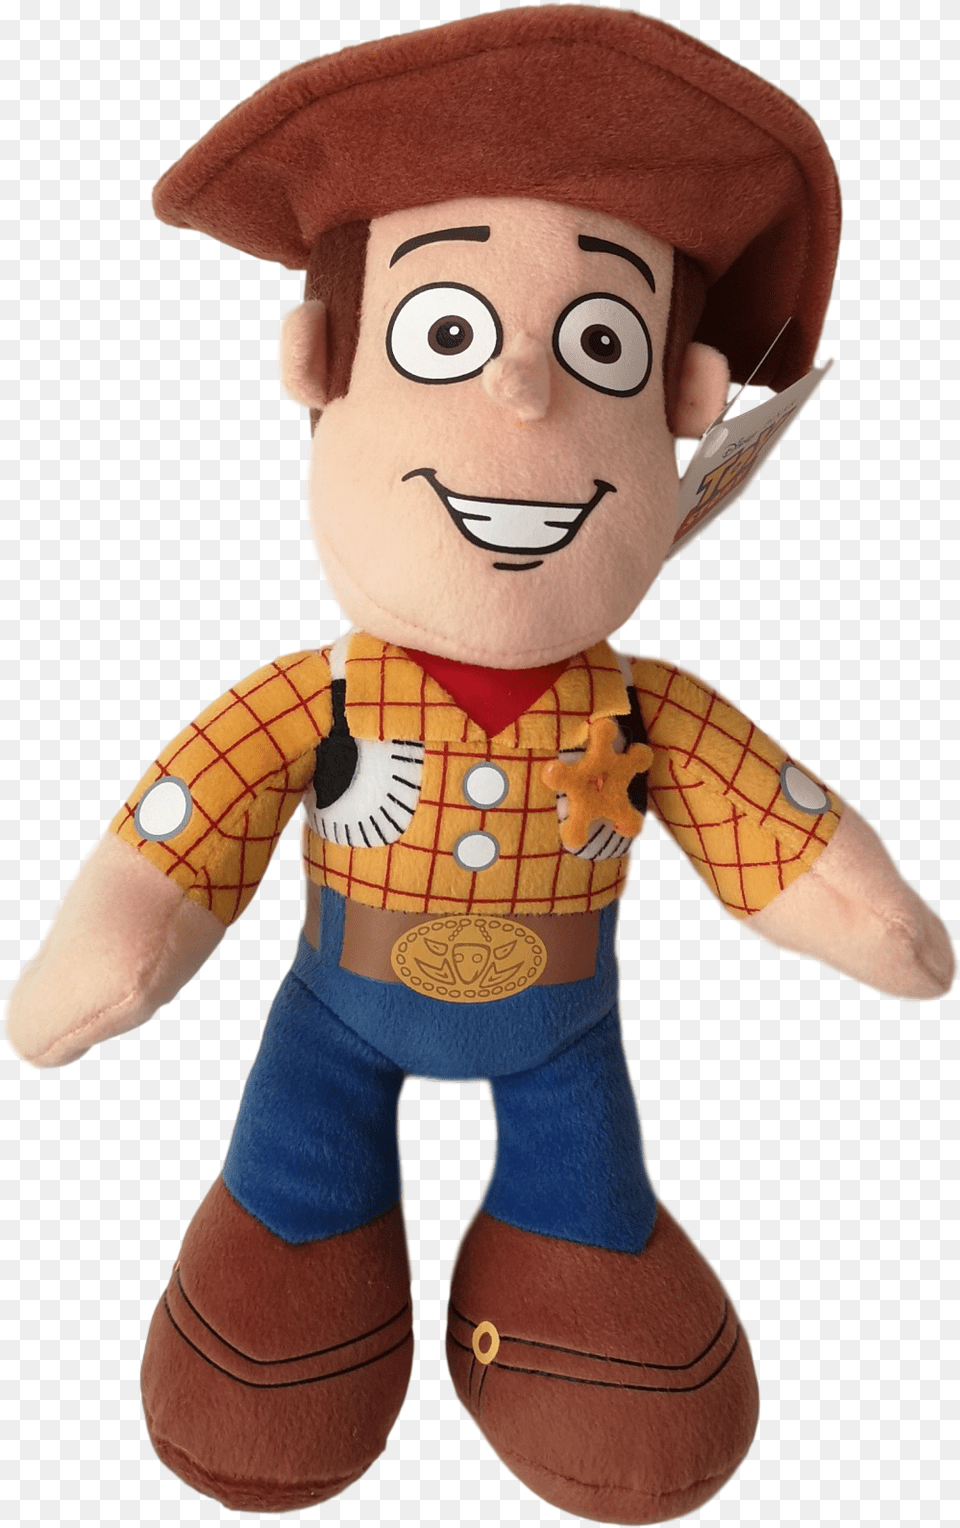 Disney S Toy Story Stuffed Toy, Plush, Doll, Face, Head Free Transparent Png